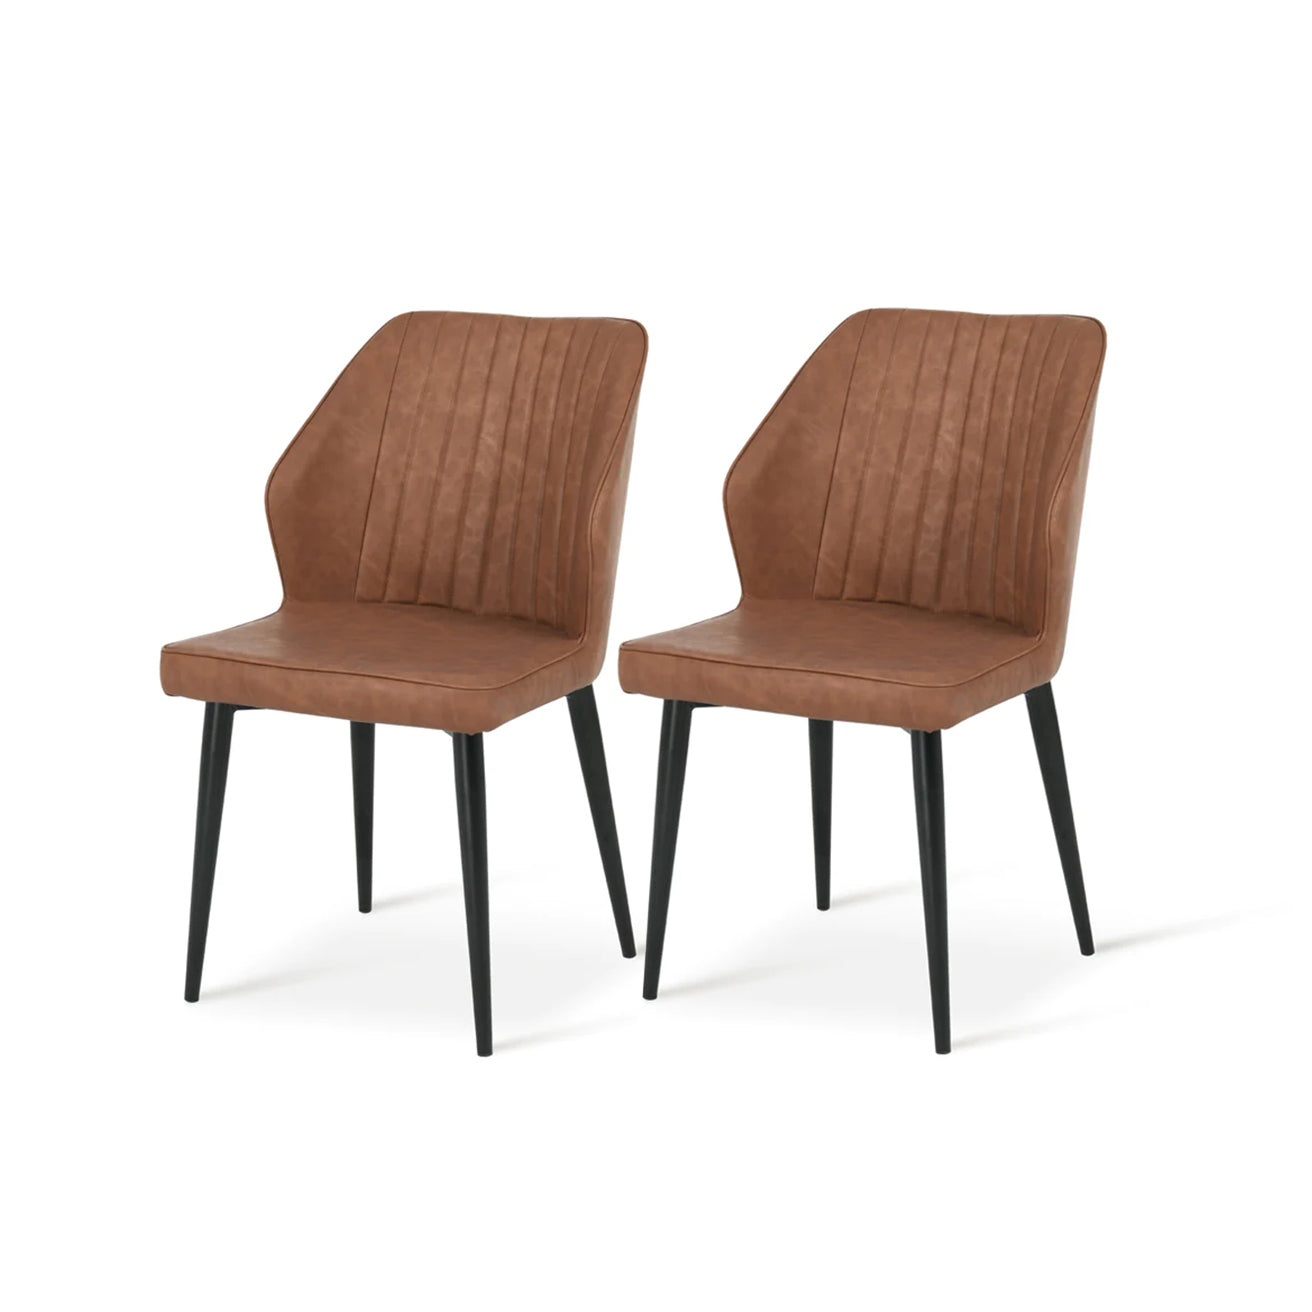 Aleena Dining Chairs [Set of 2] [Pu Leather]